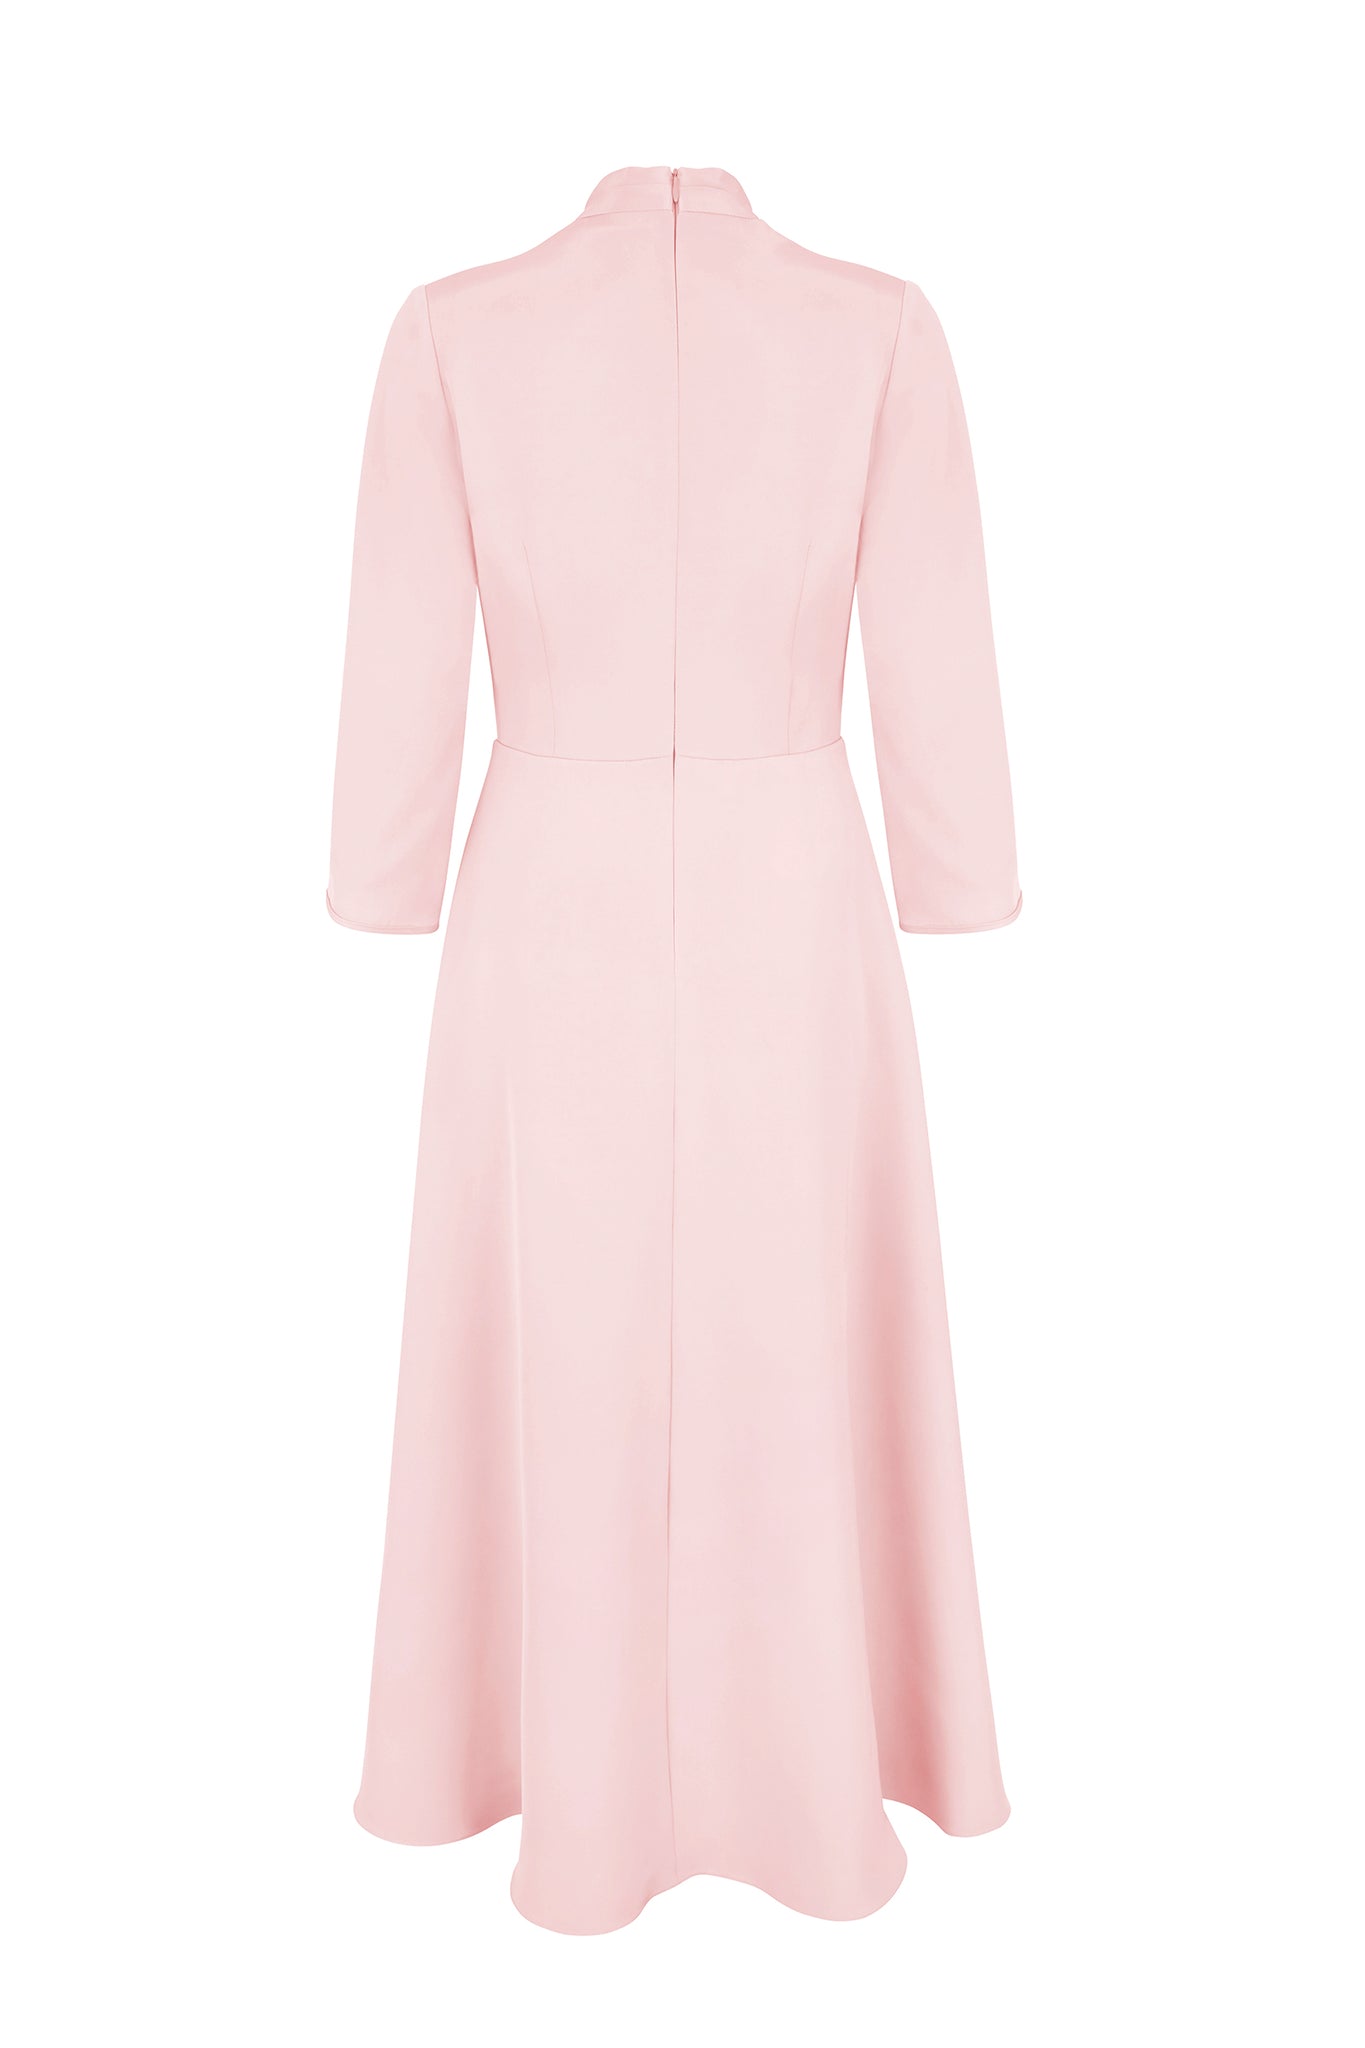 Fontaine Silk Crepe Dress Paris Pink | Events & Mother Of The Bride ...